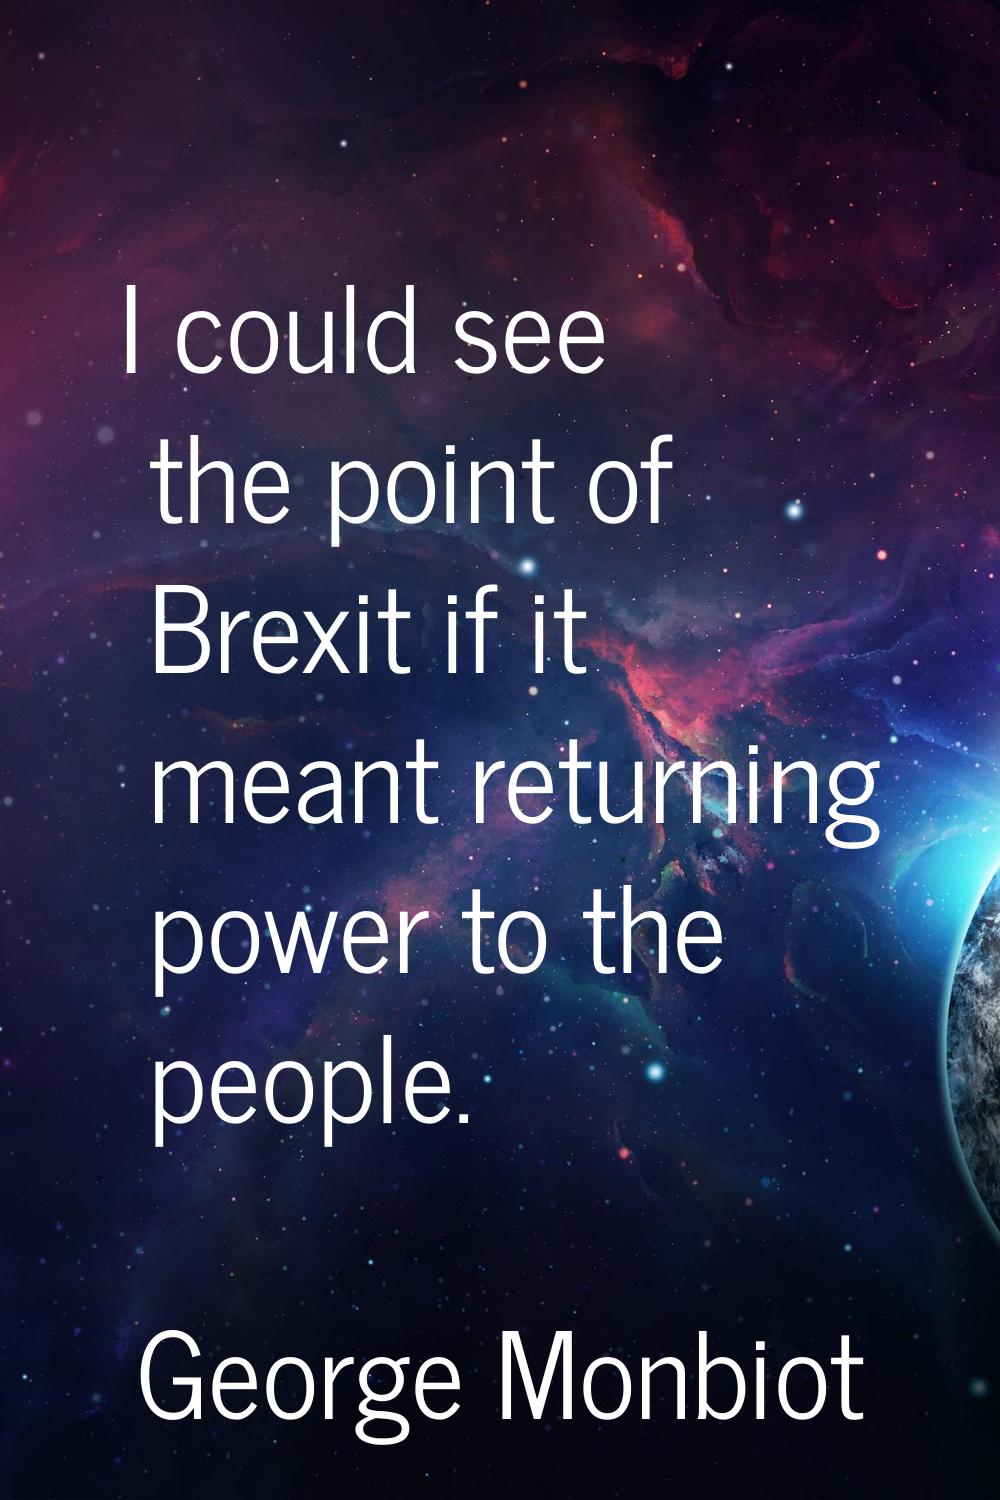 I could see the point of Brexit if it meant returning power to the people.